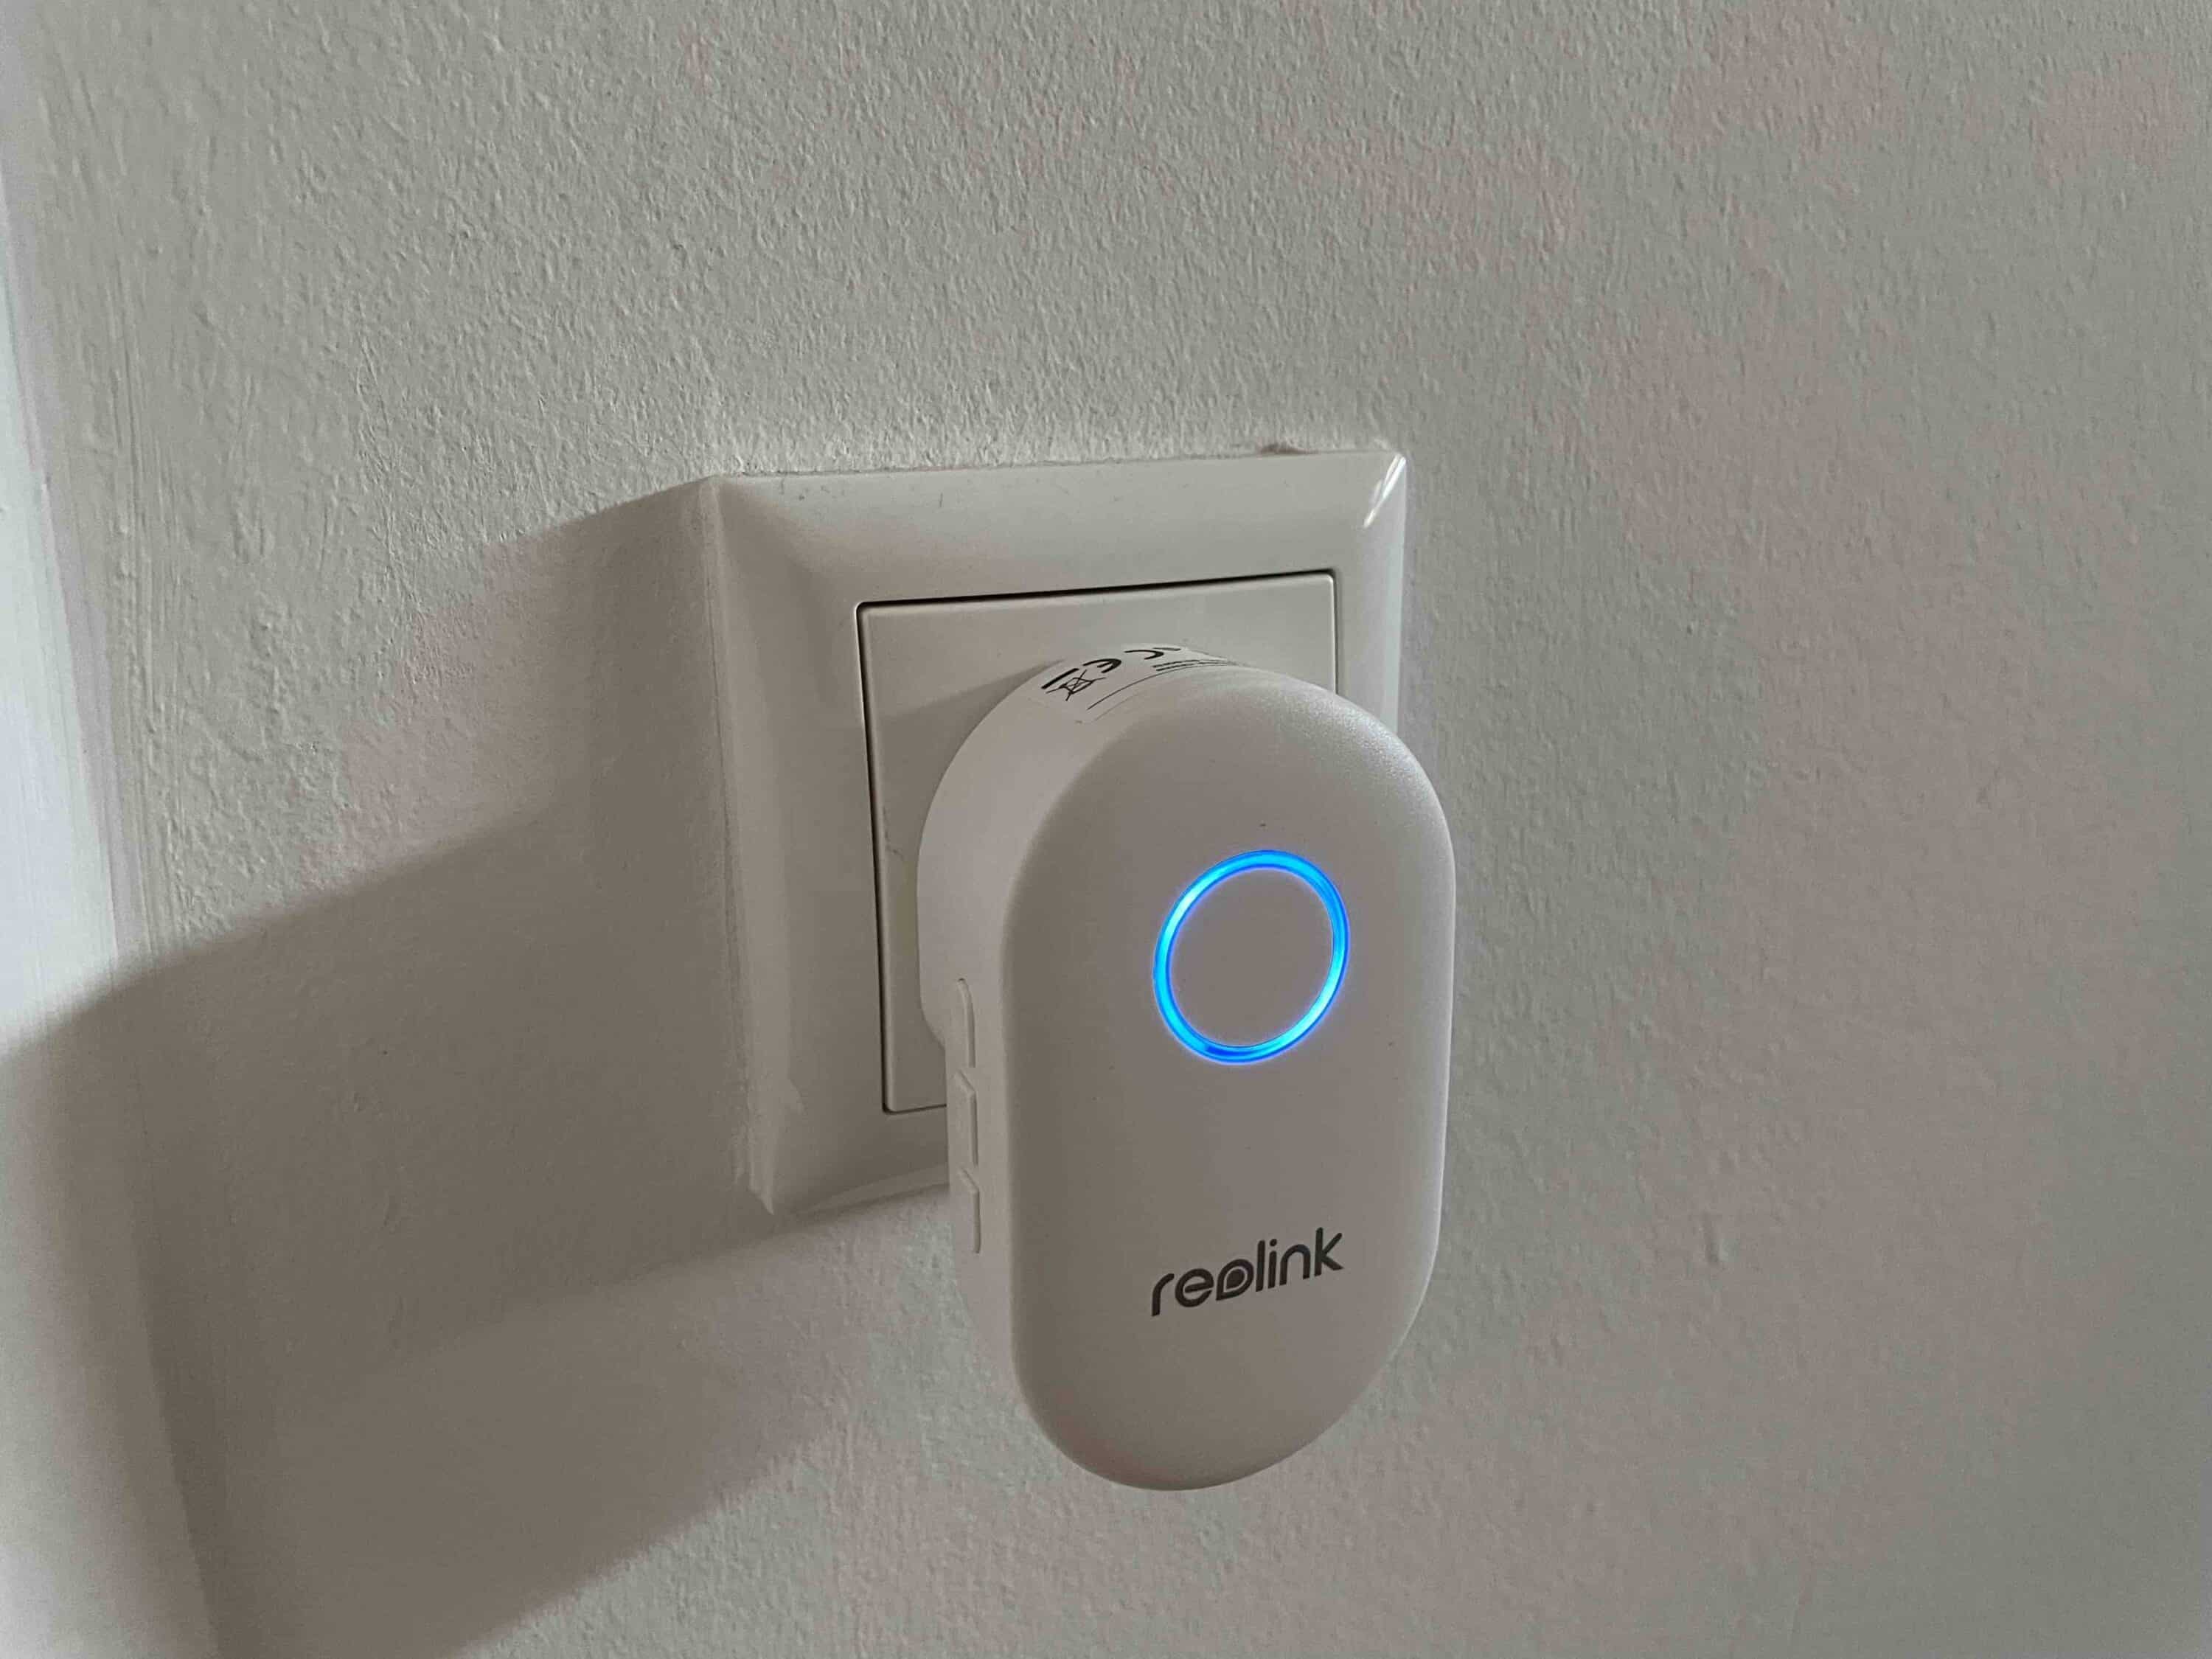 My Initial Experience/Review of the Reolink Wifi Doorbell : r/reolinkcam